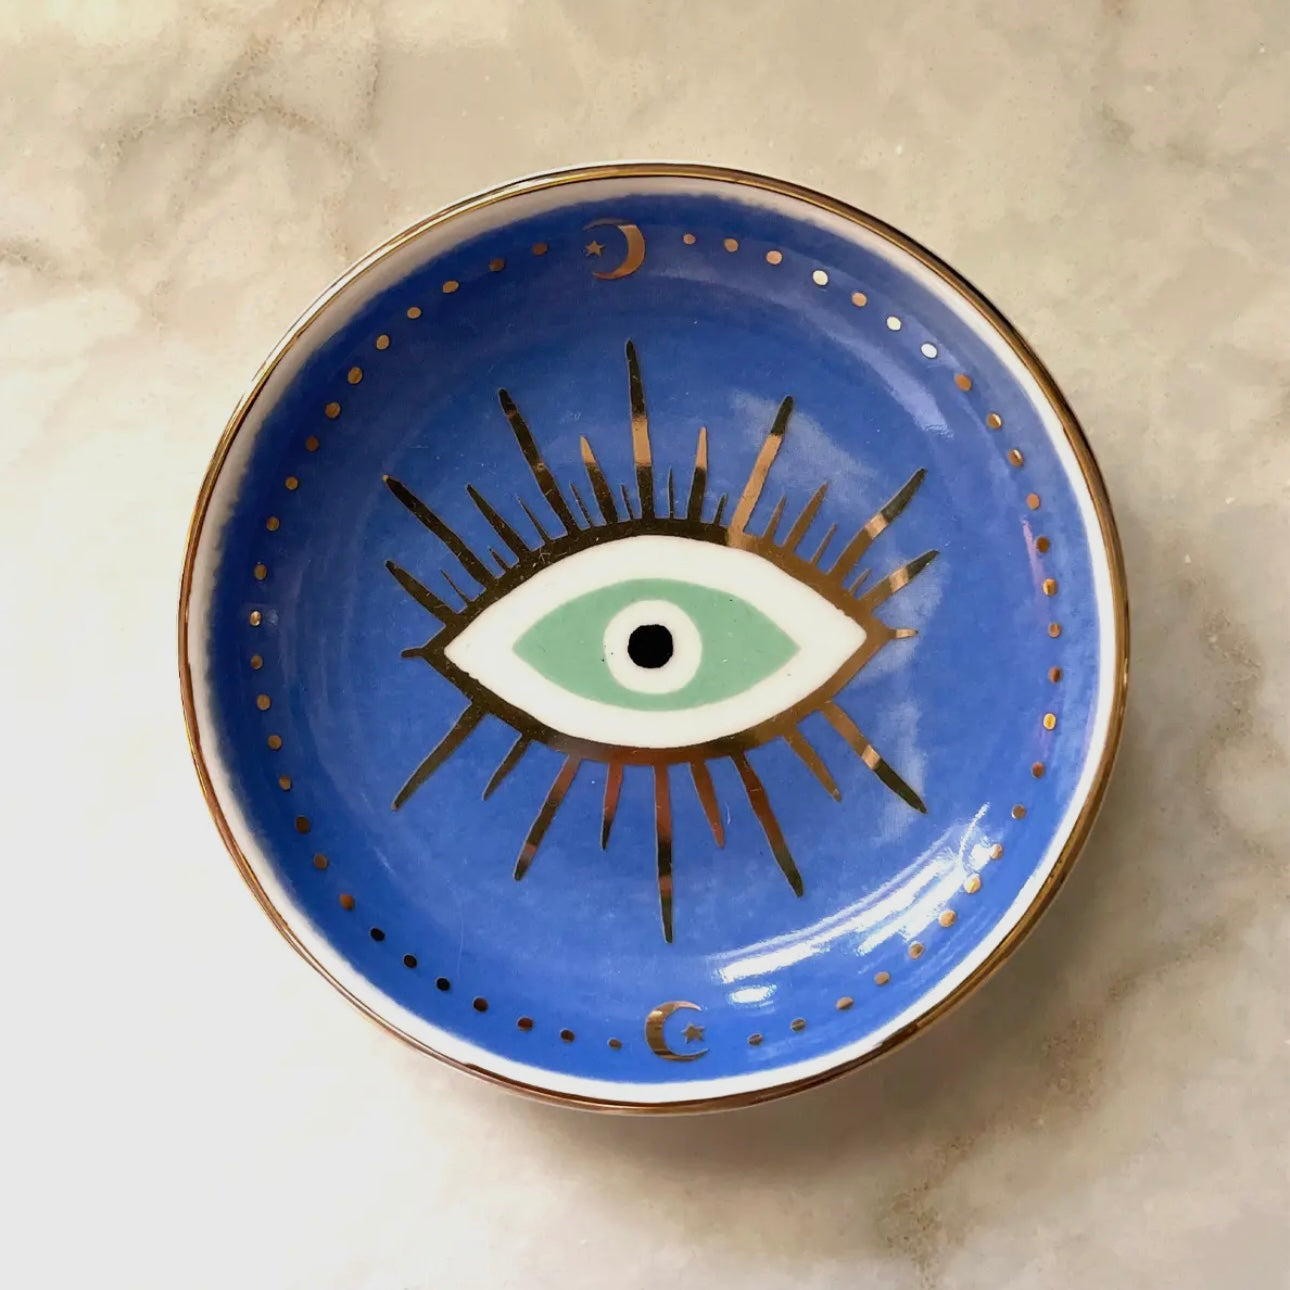 Eye of Protection white ceramic trinket dish with colorful hand-painted designs and gold edge.